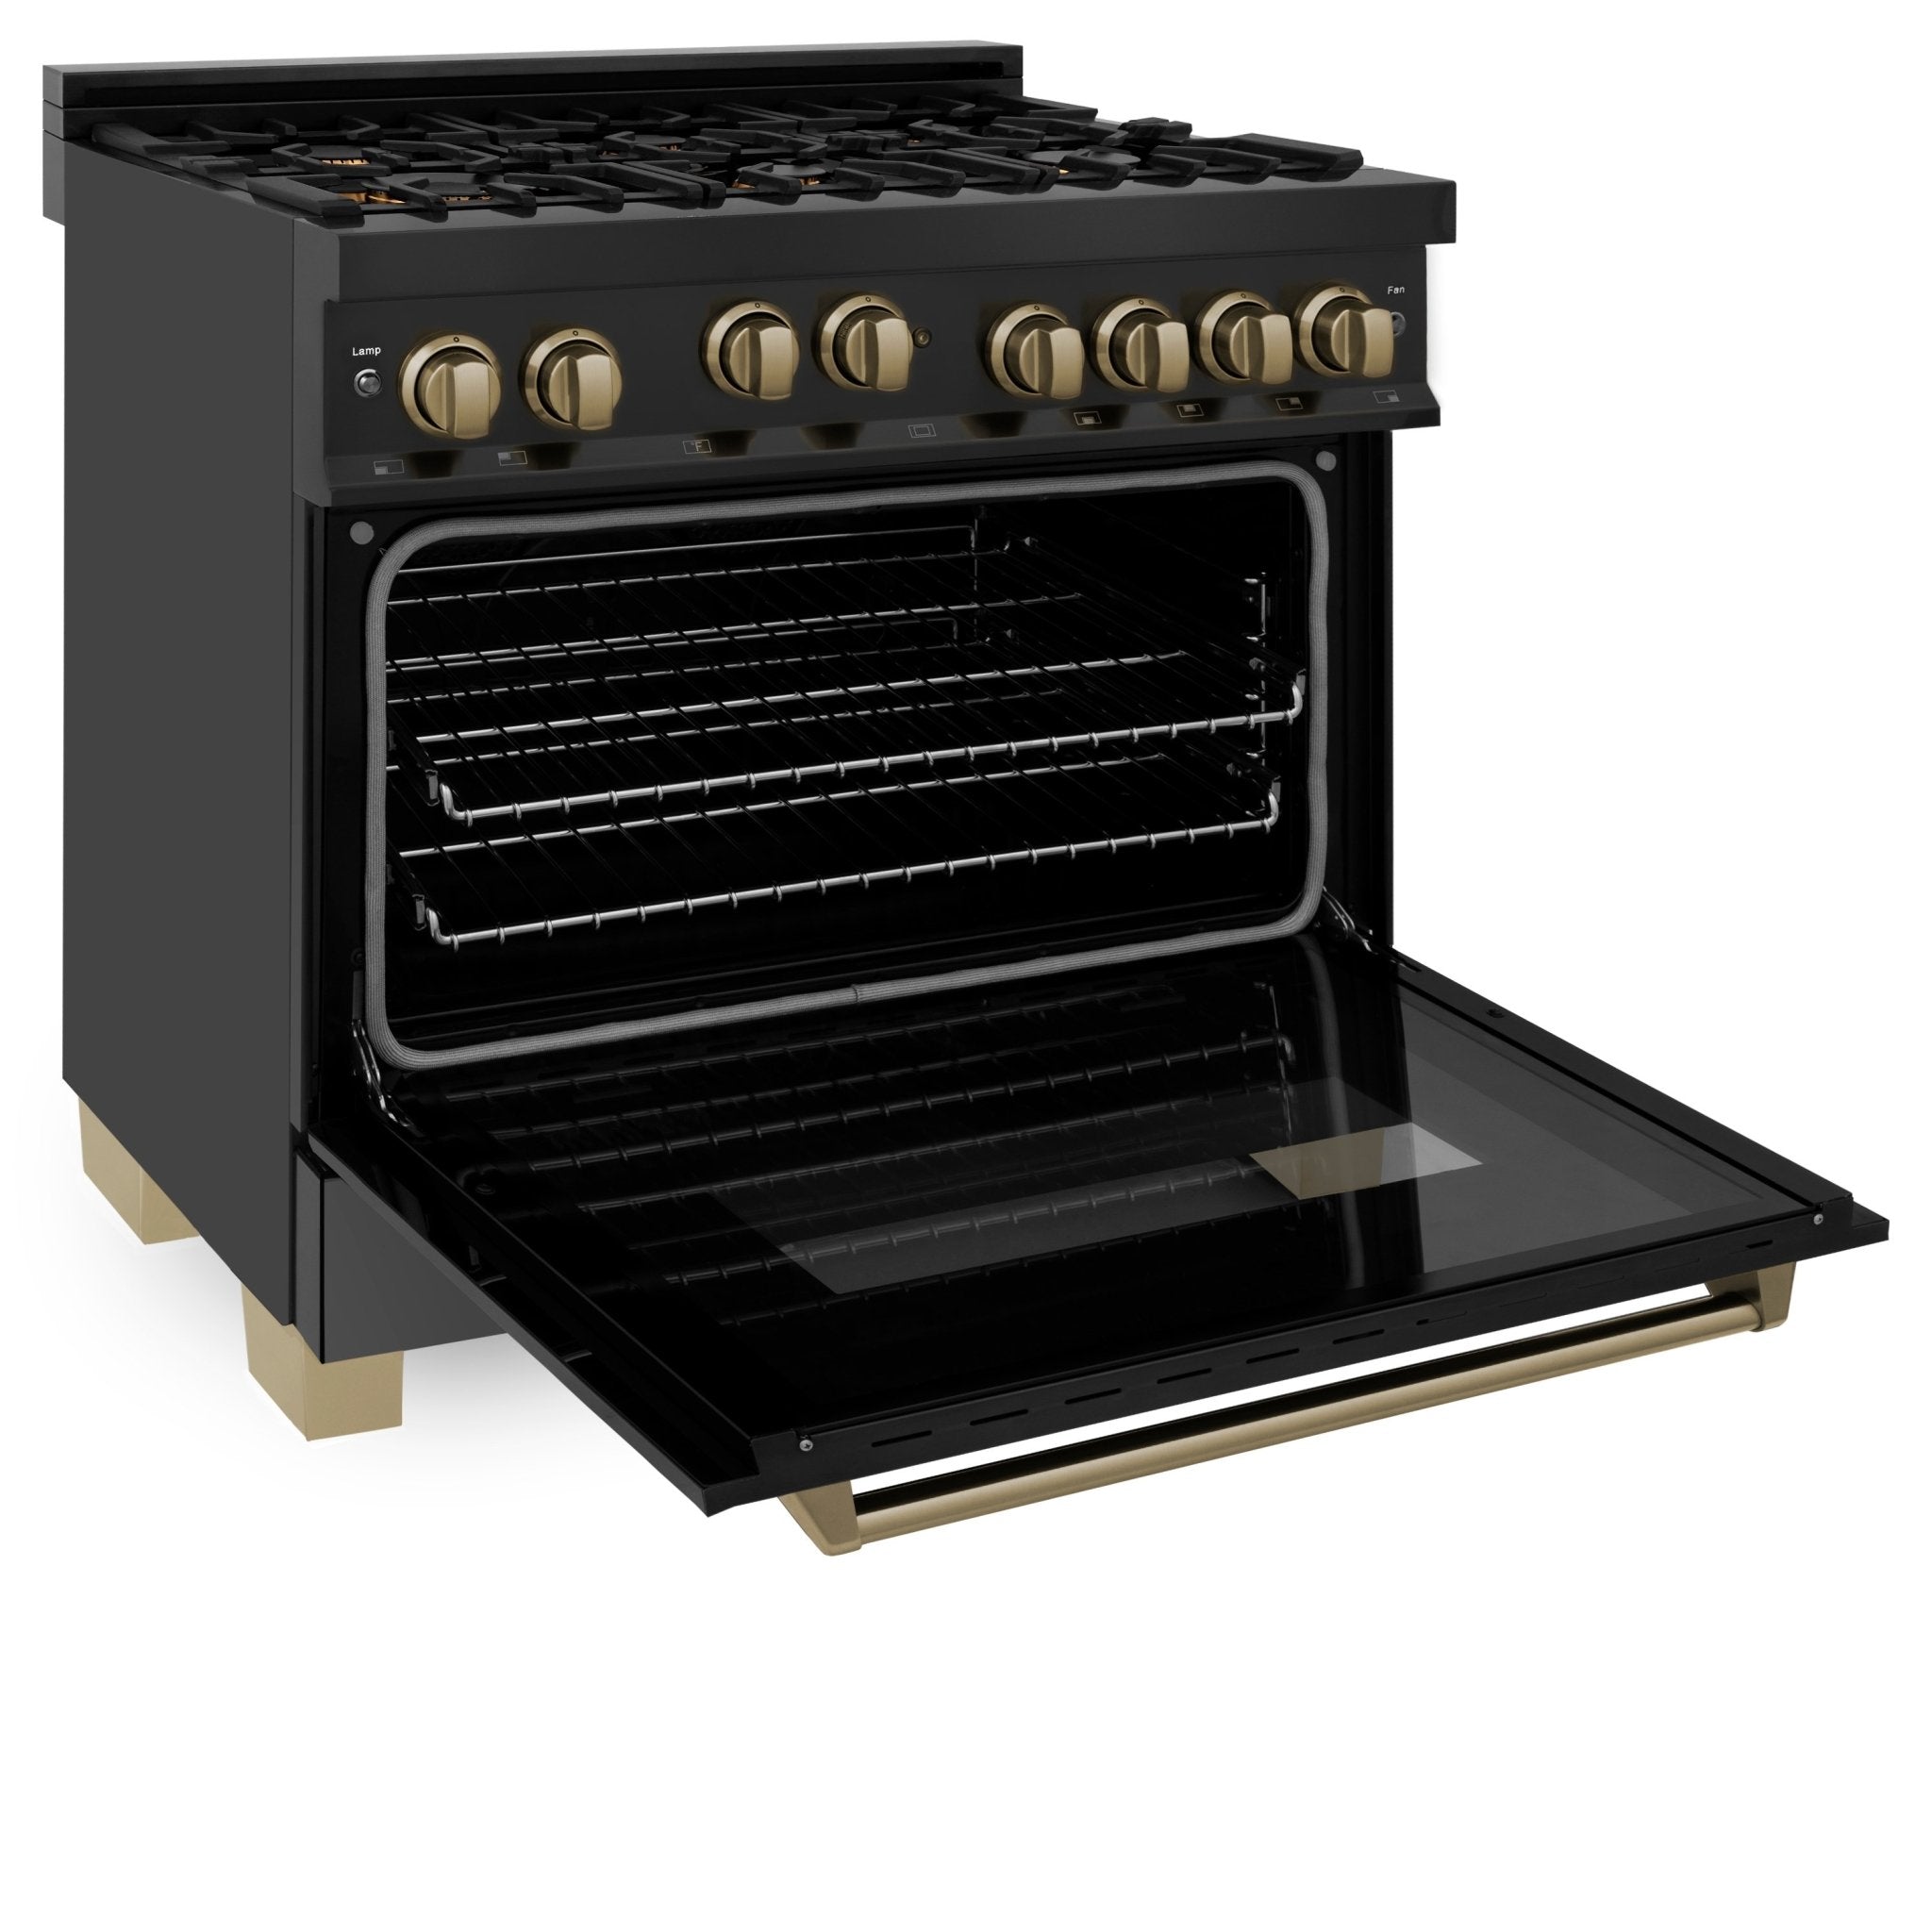 ZLINE Autograph Edition 36" 4.6 cu. ft. Range with Gas Stove and Gas Oven in Black Stainless Steel with Accents (RGBZ-36) - Rustic Kitchen & Bath - Ranges - ZLINE Kitchen and Bath